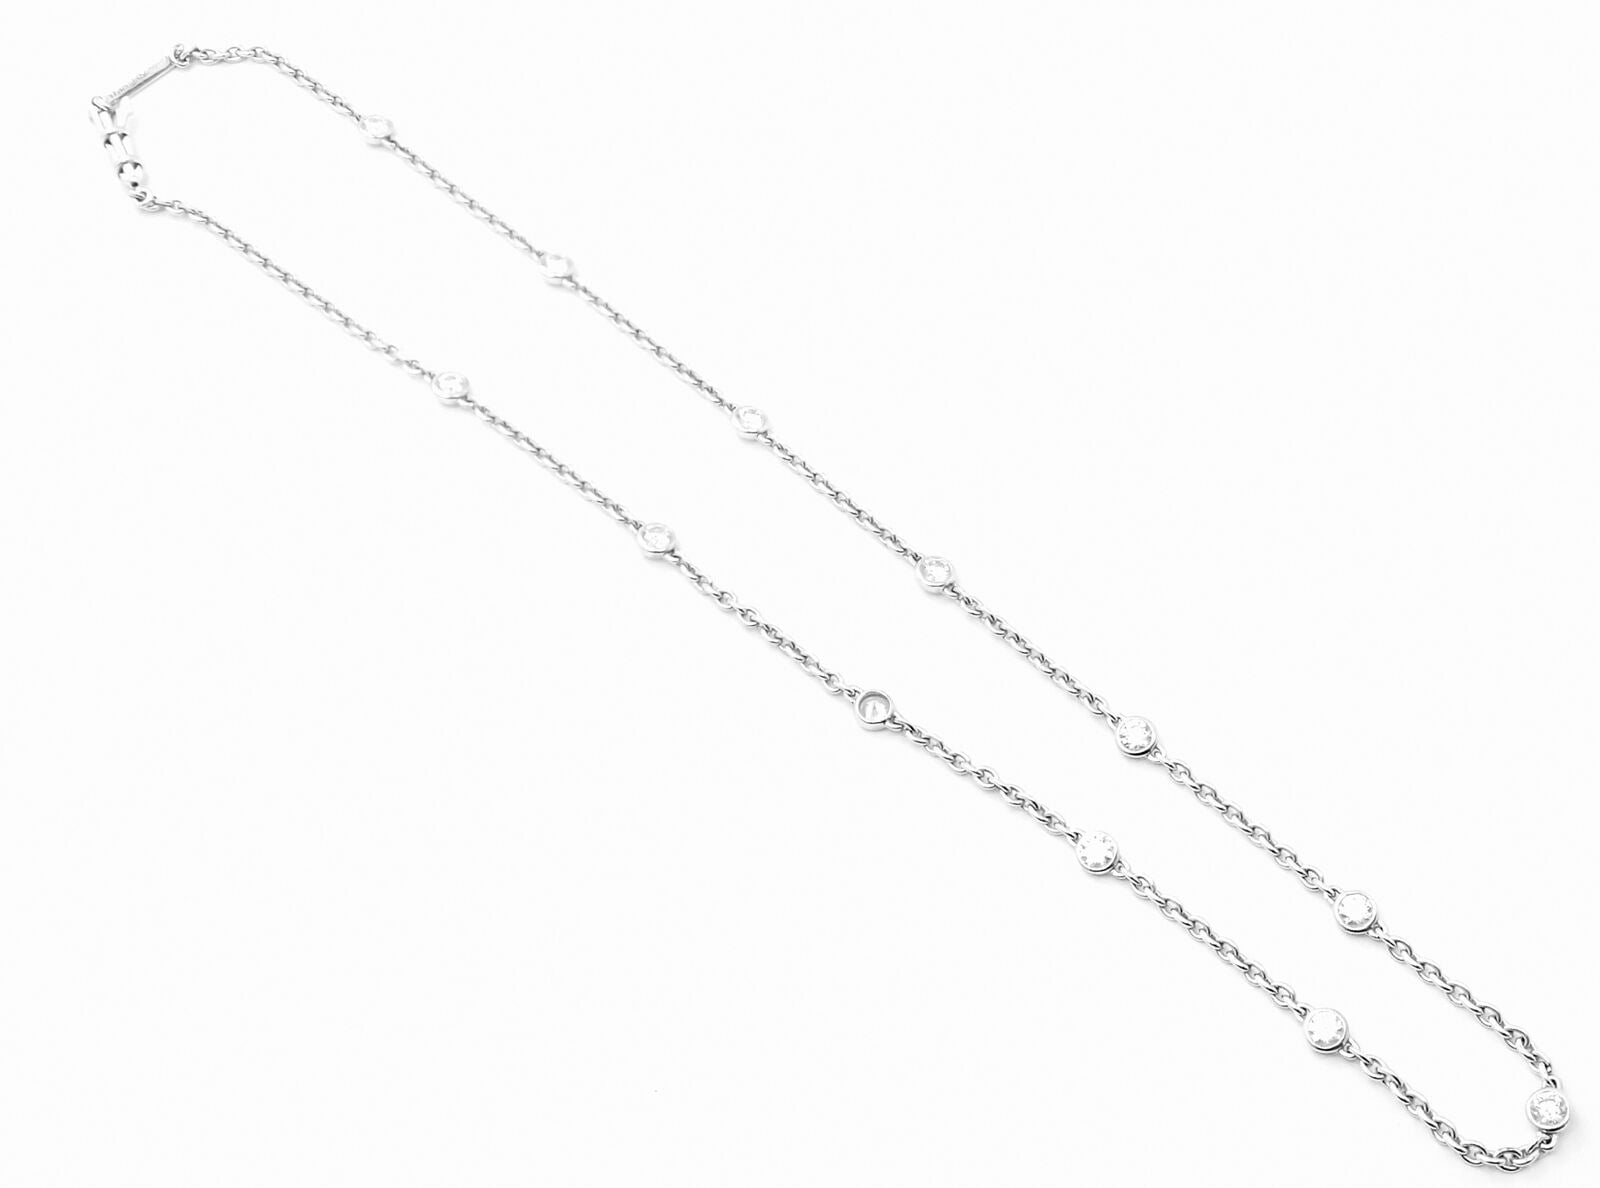 Cartier Jewelry & Watches:Fine Jewelry:Necklaces & Pendants Authentic! Cartier 18k White Gold 1.5ct Diamond By The Yard Chain Necklace